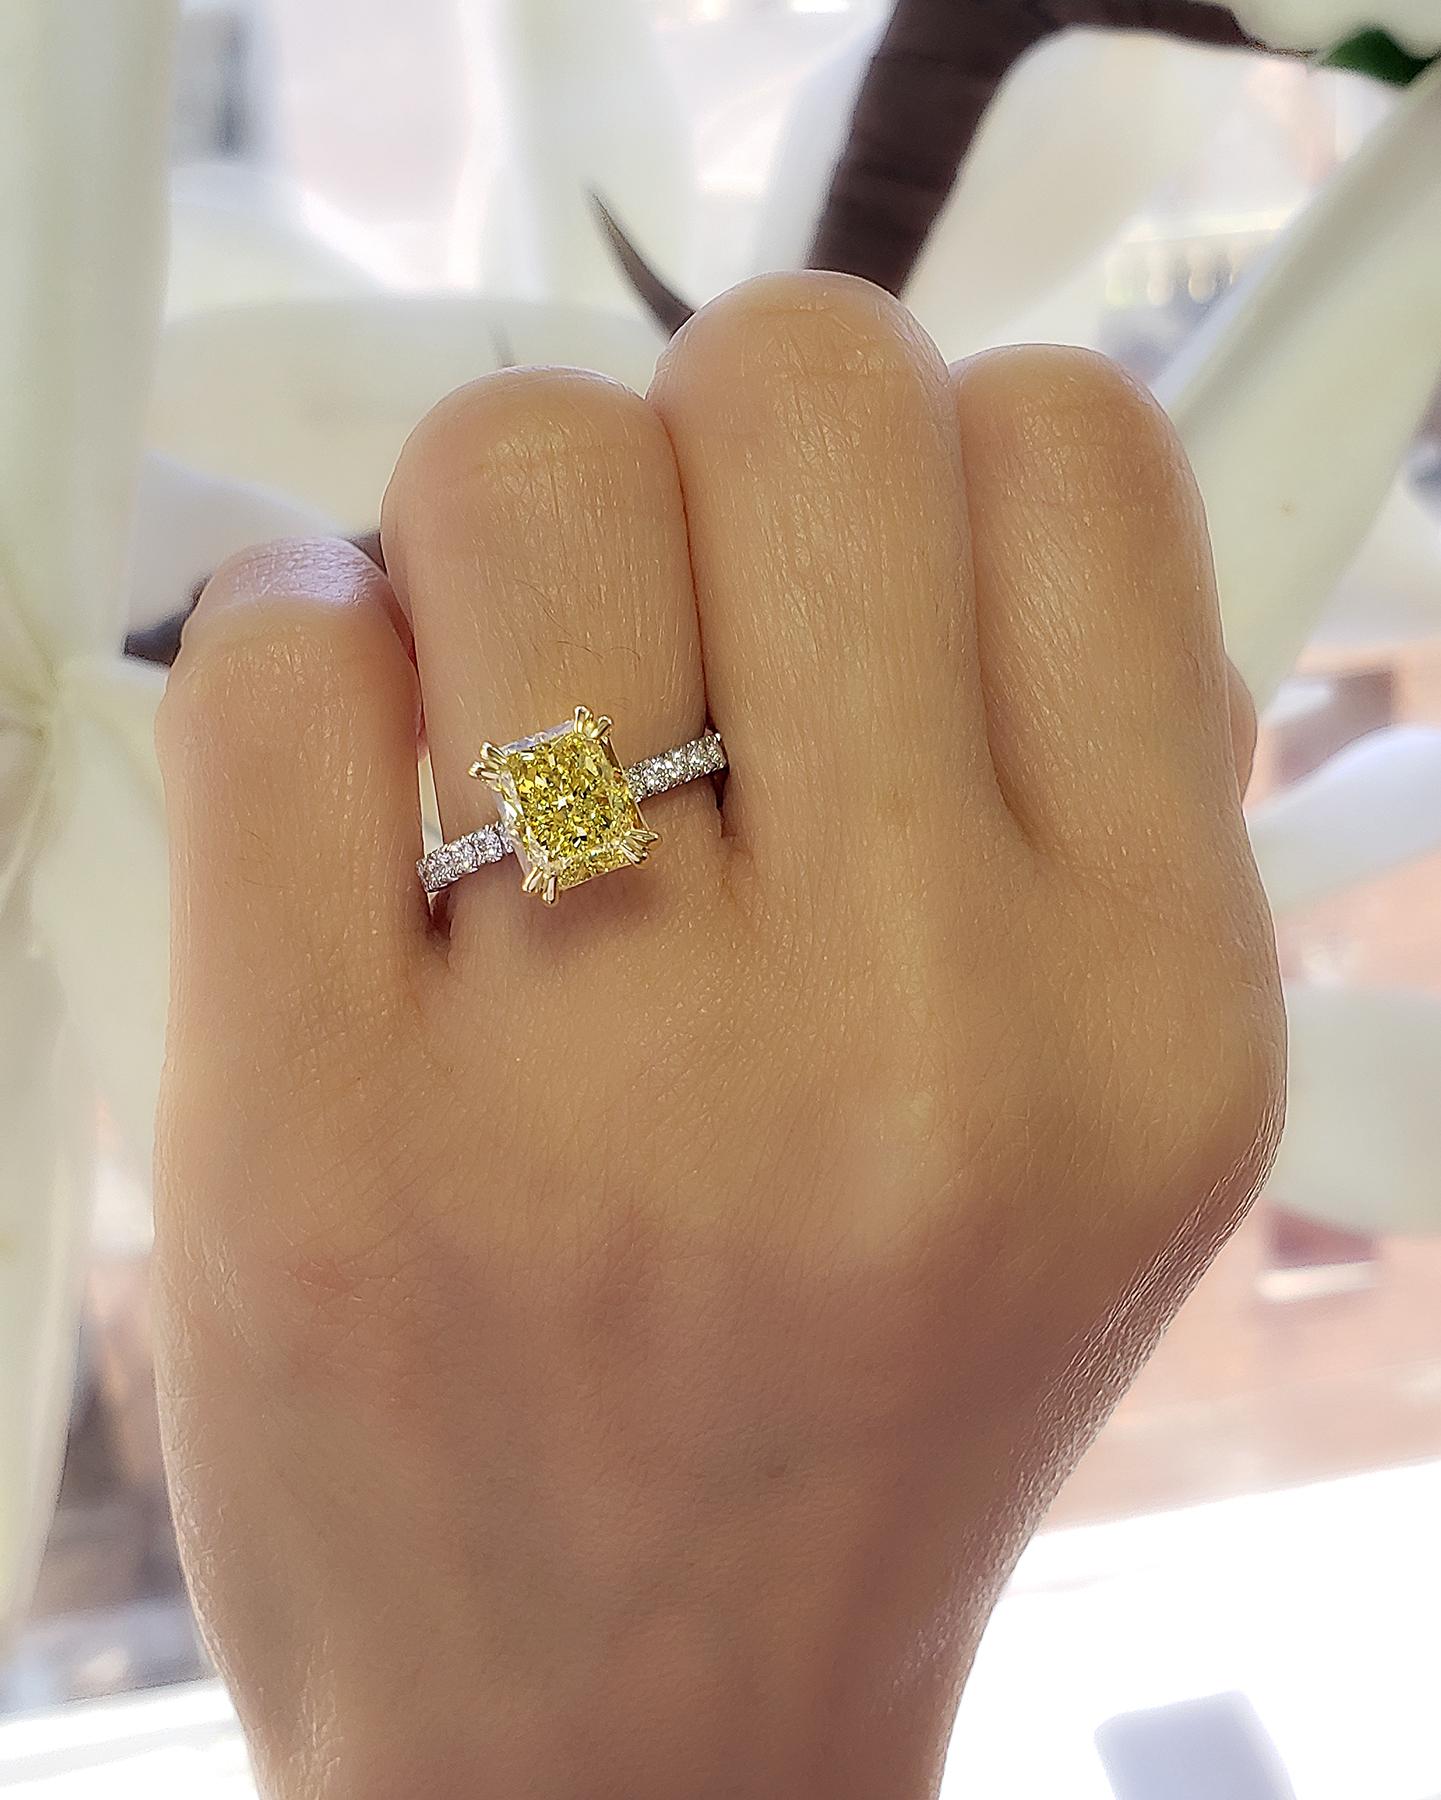 This beautiful elongated canary yellow radiant cut diamond ring features a 2.50 ct. fancy Light yellow radiant cut diamond on the center with a clarity grade of VS2. Complimenting the sides are 0.75 ct. round cut diamond with a color grade of E-F